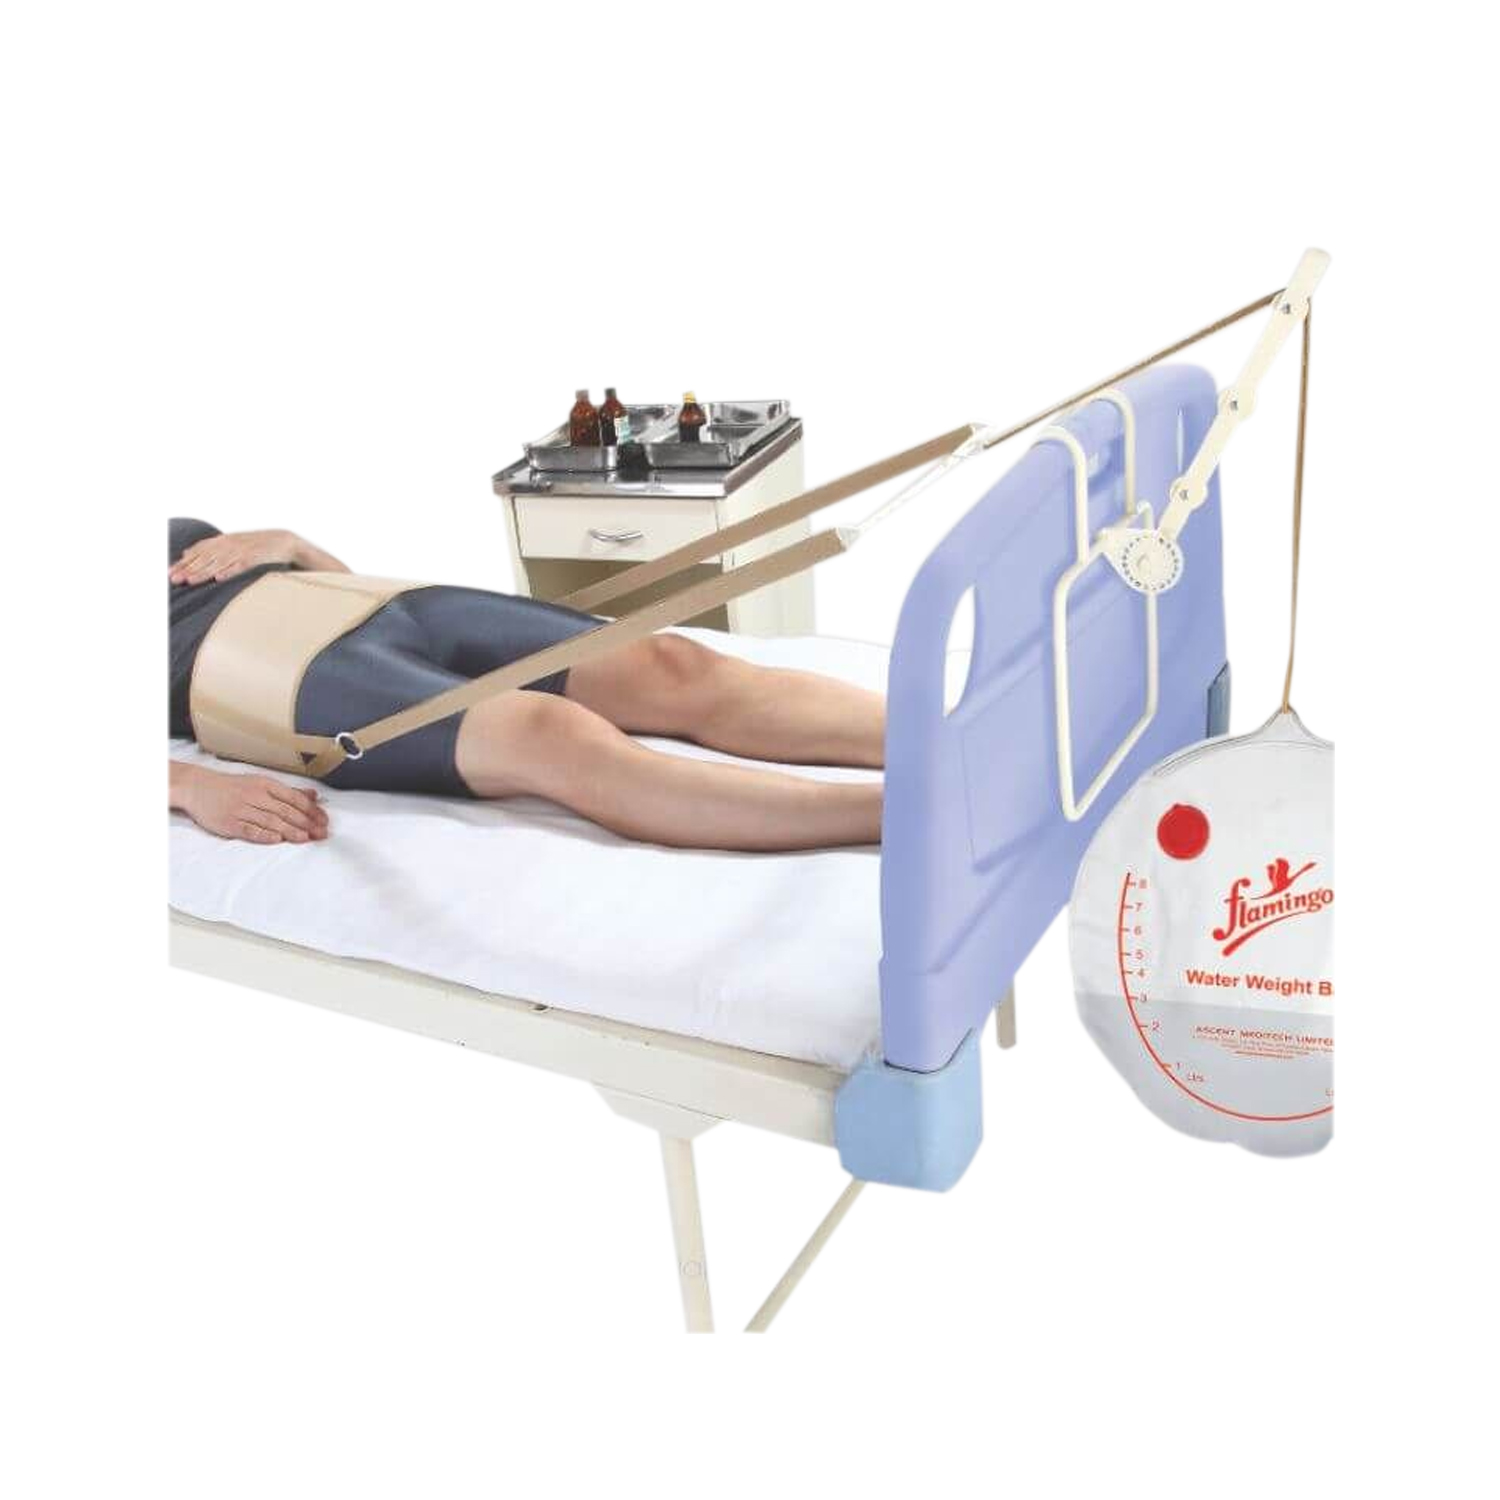 Tynor Cervical Traction Kit Sleeping, For Hospital at best price